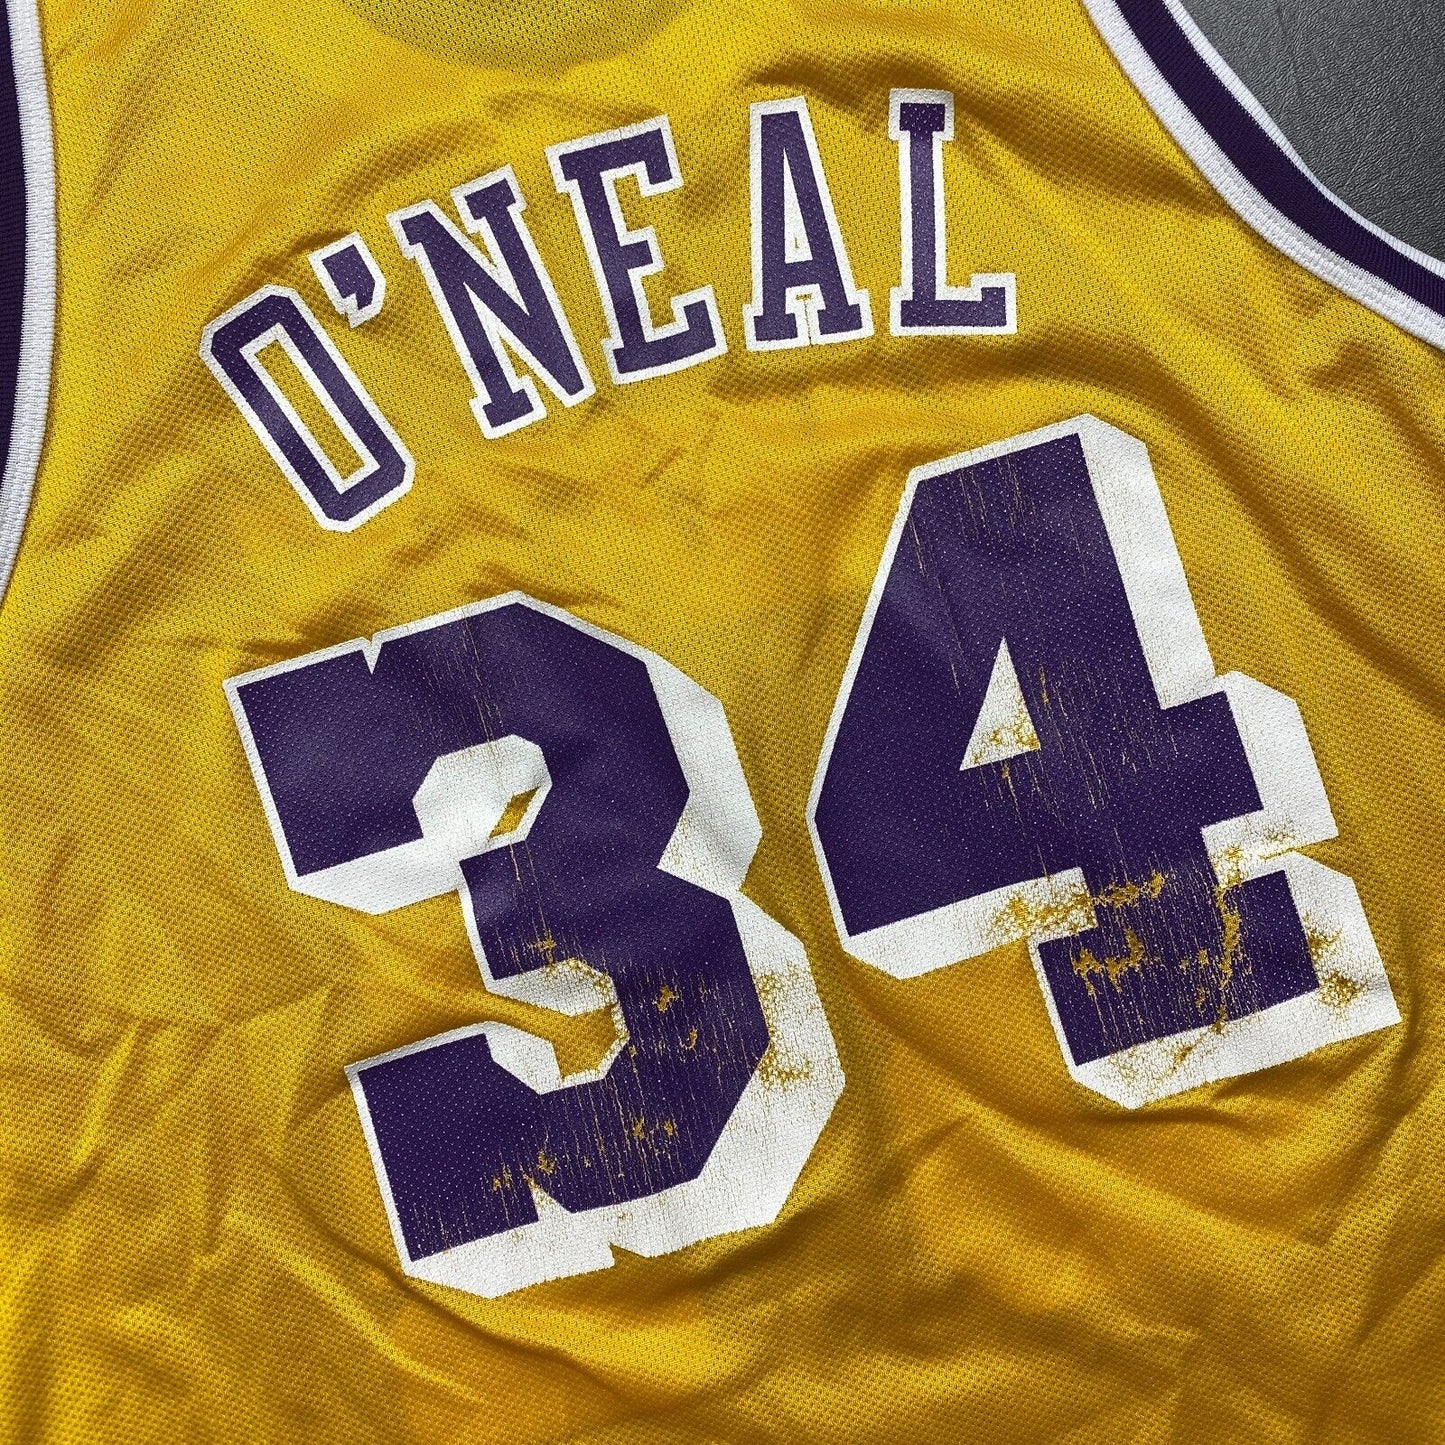 100% Authentic Shaquille O'Neal Vintage Champion Lakers Jersey Size 48 L XL Mens